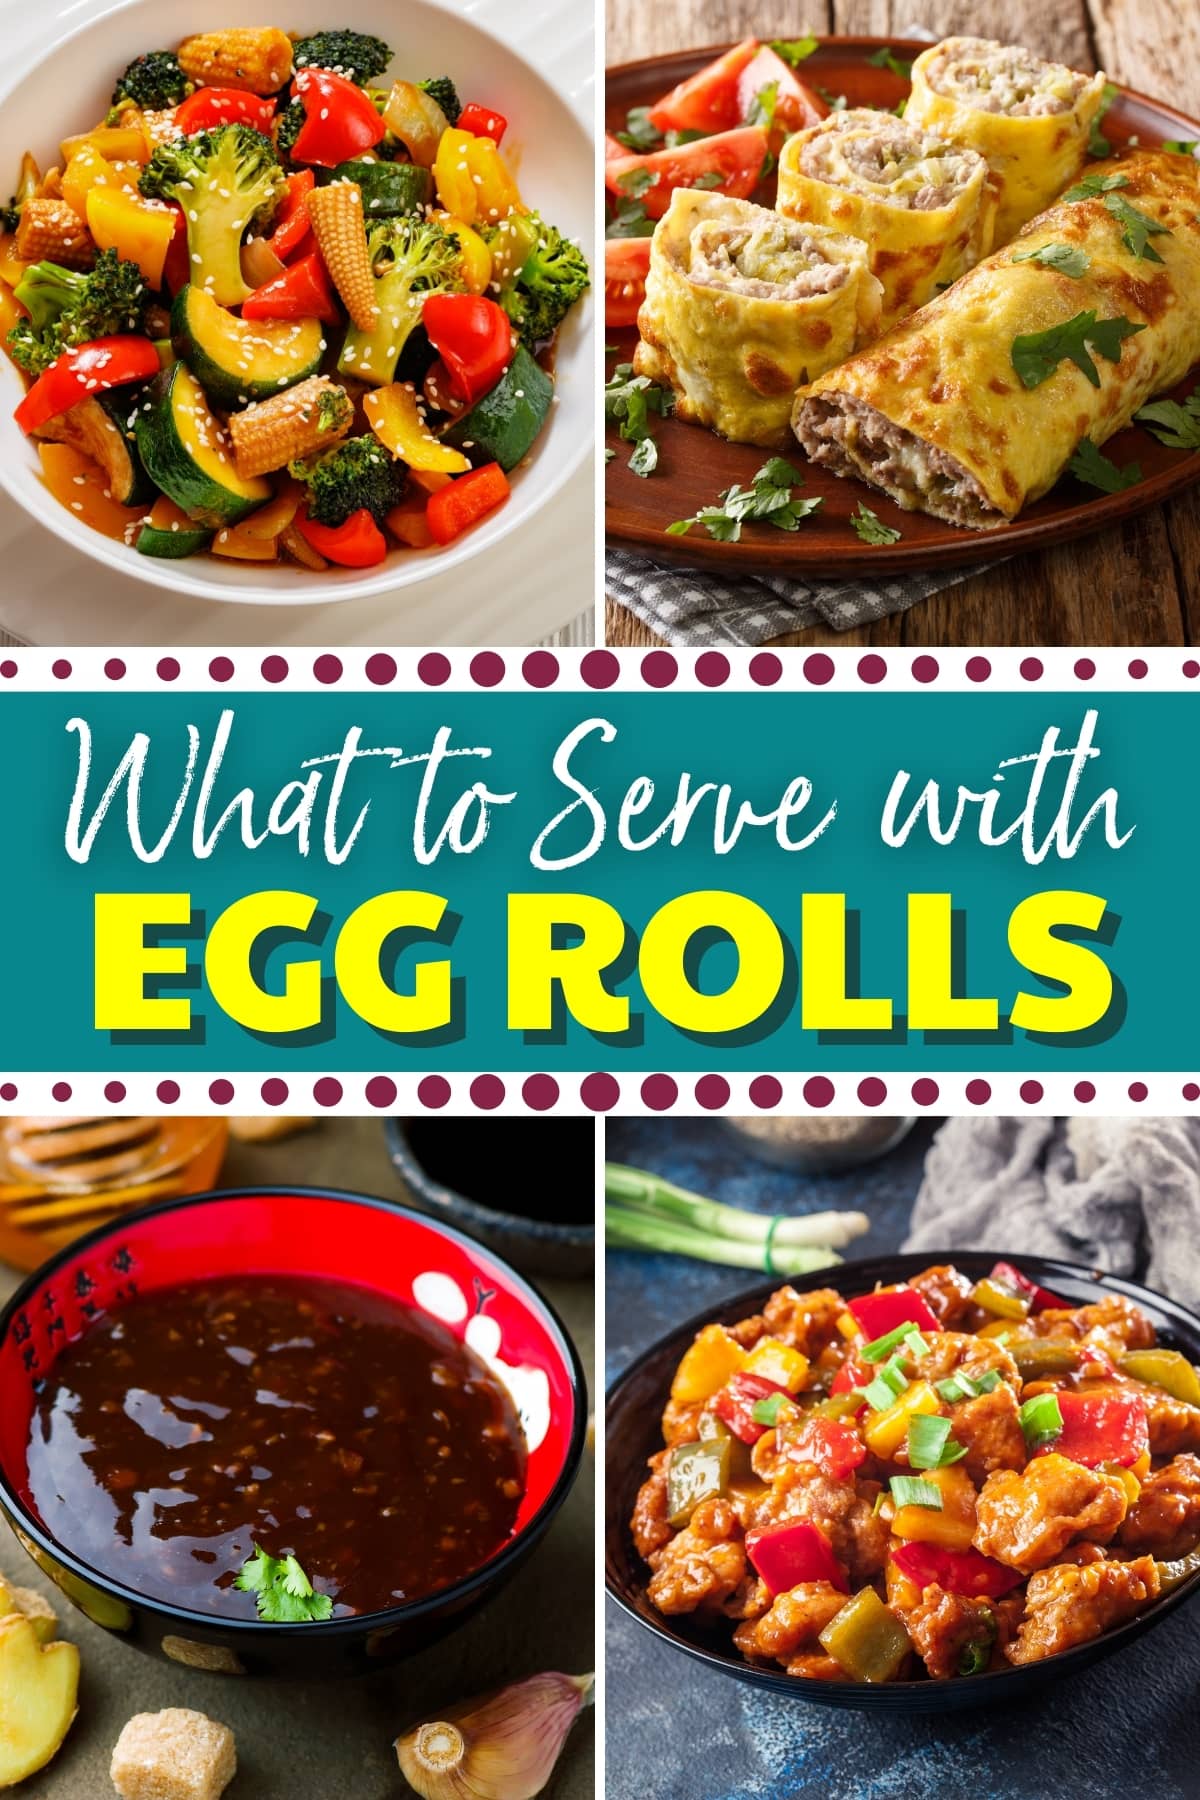 What to Serve with Egg Rolls